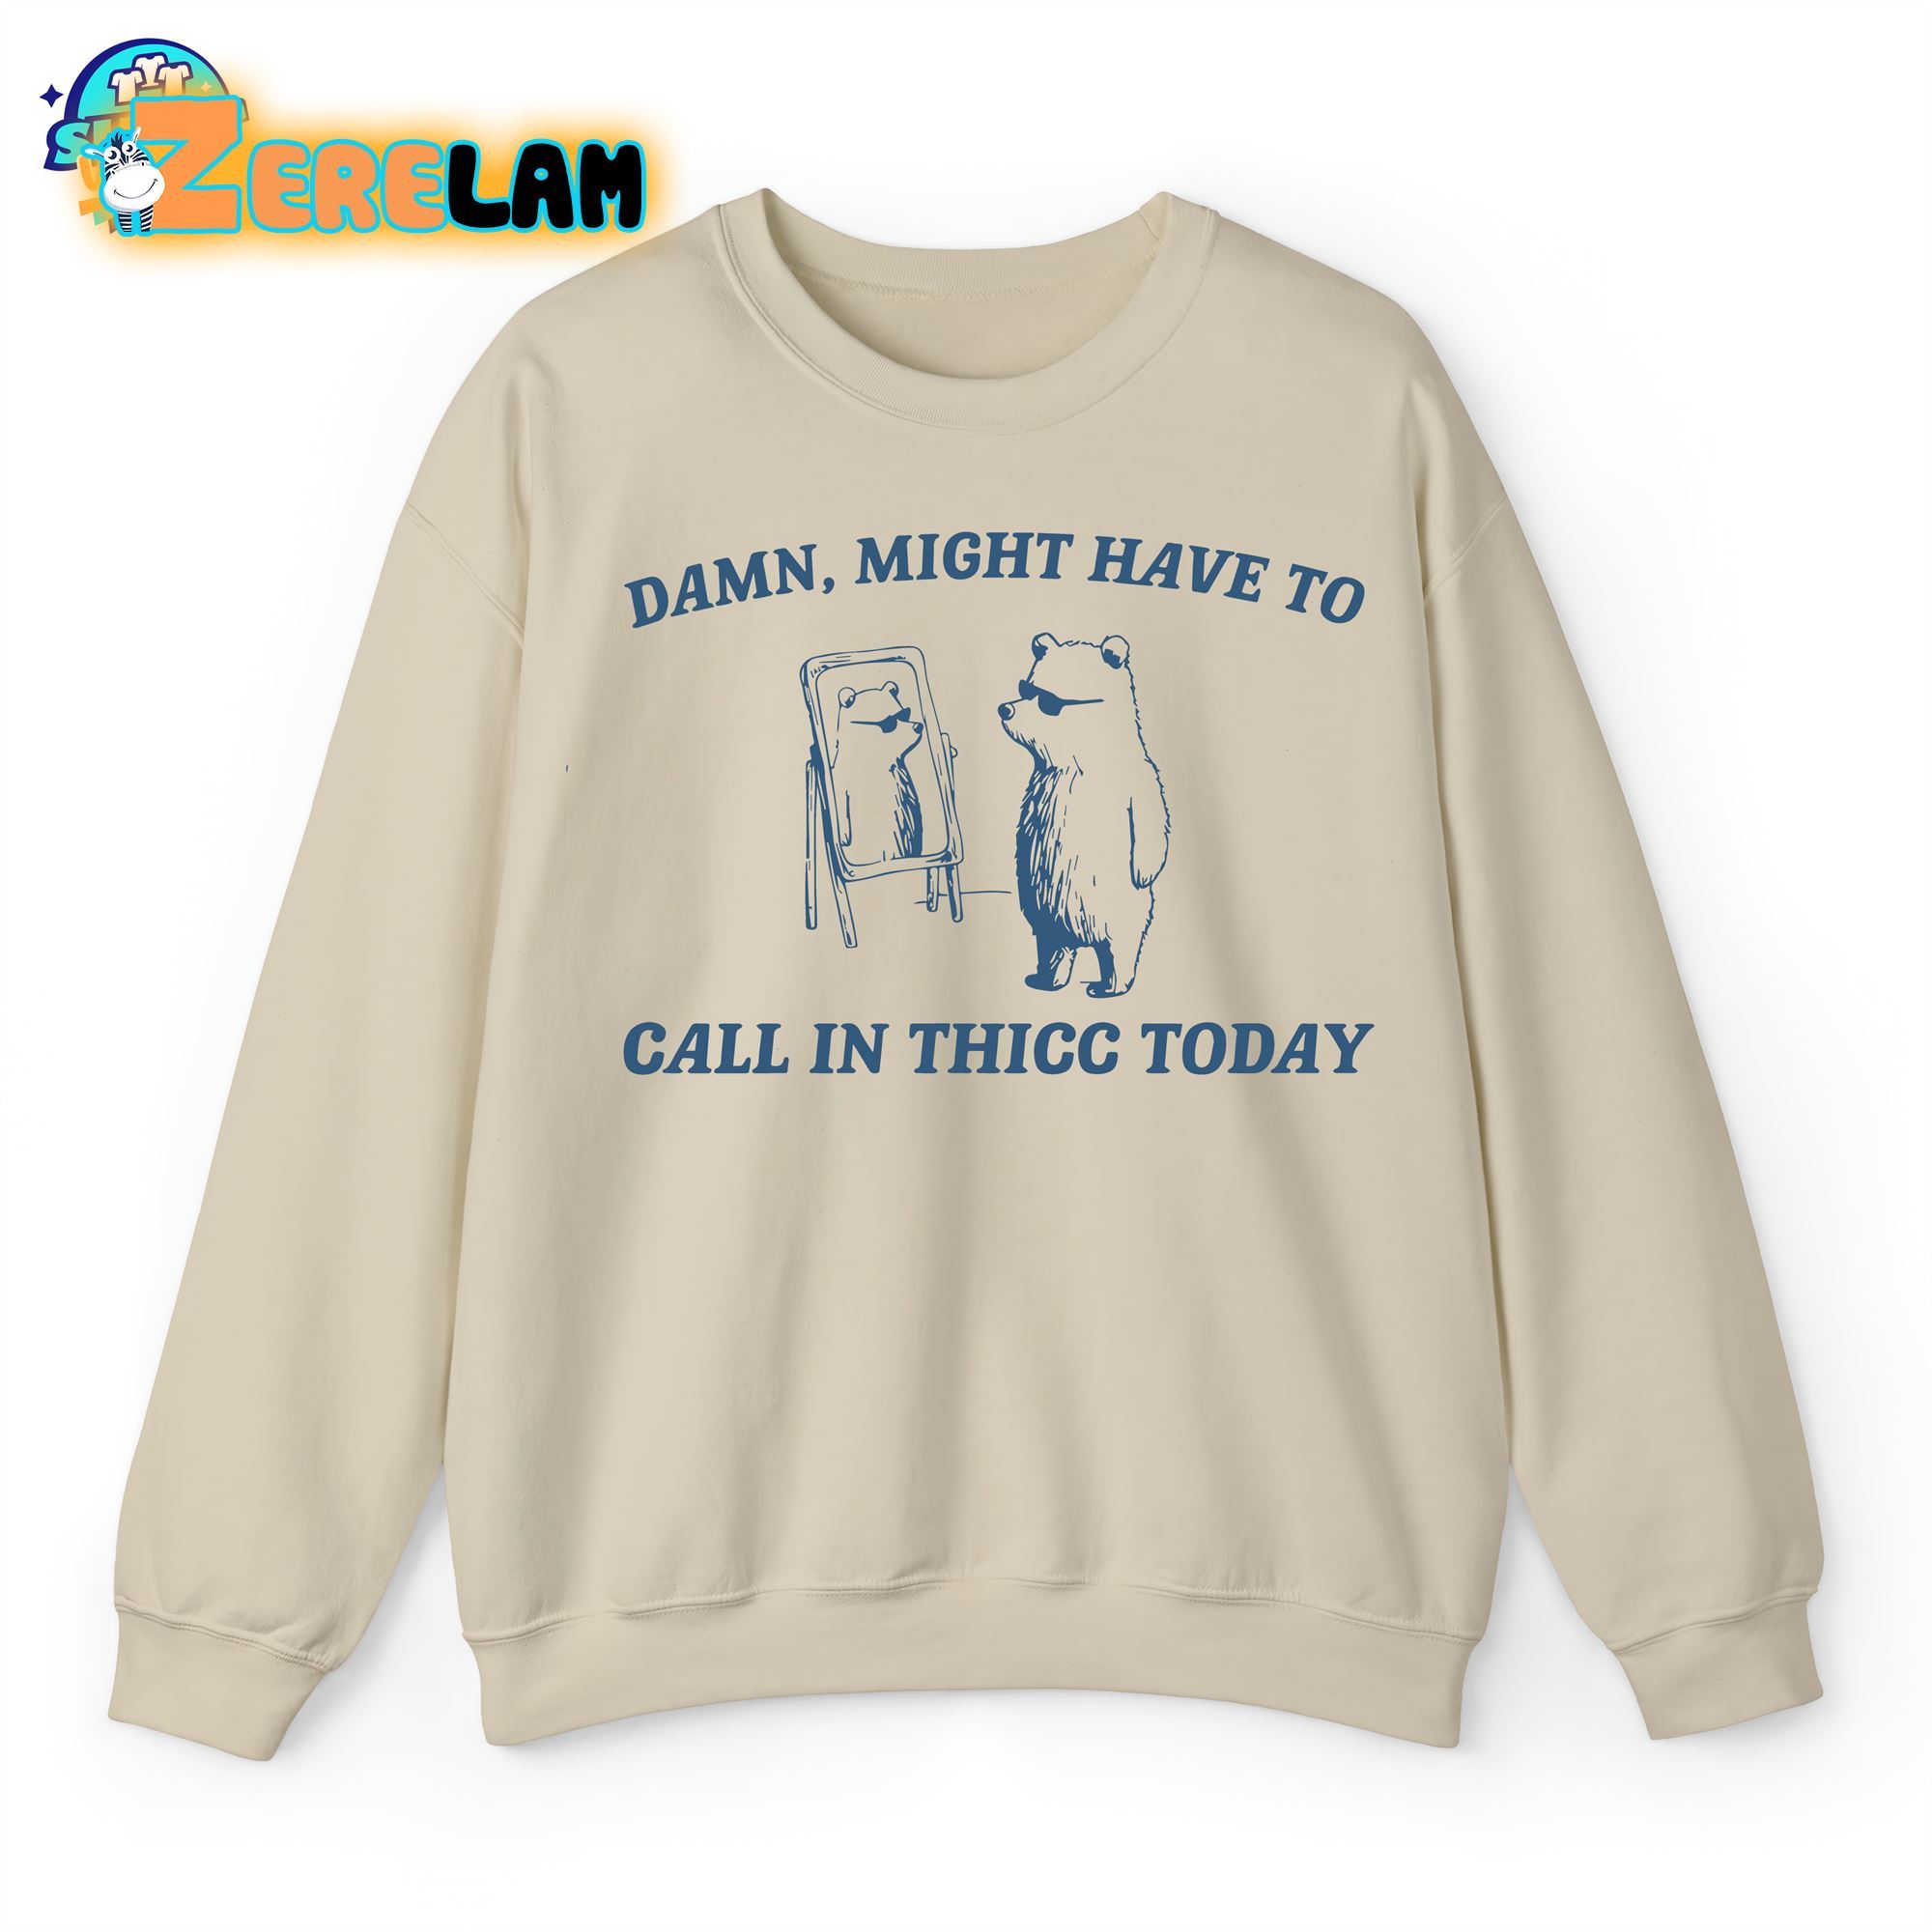 Damn Might Have To Call In Thicc Today Sweatshirt - Zerelam